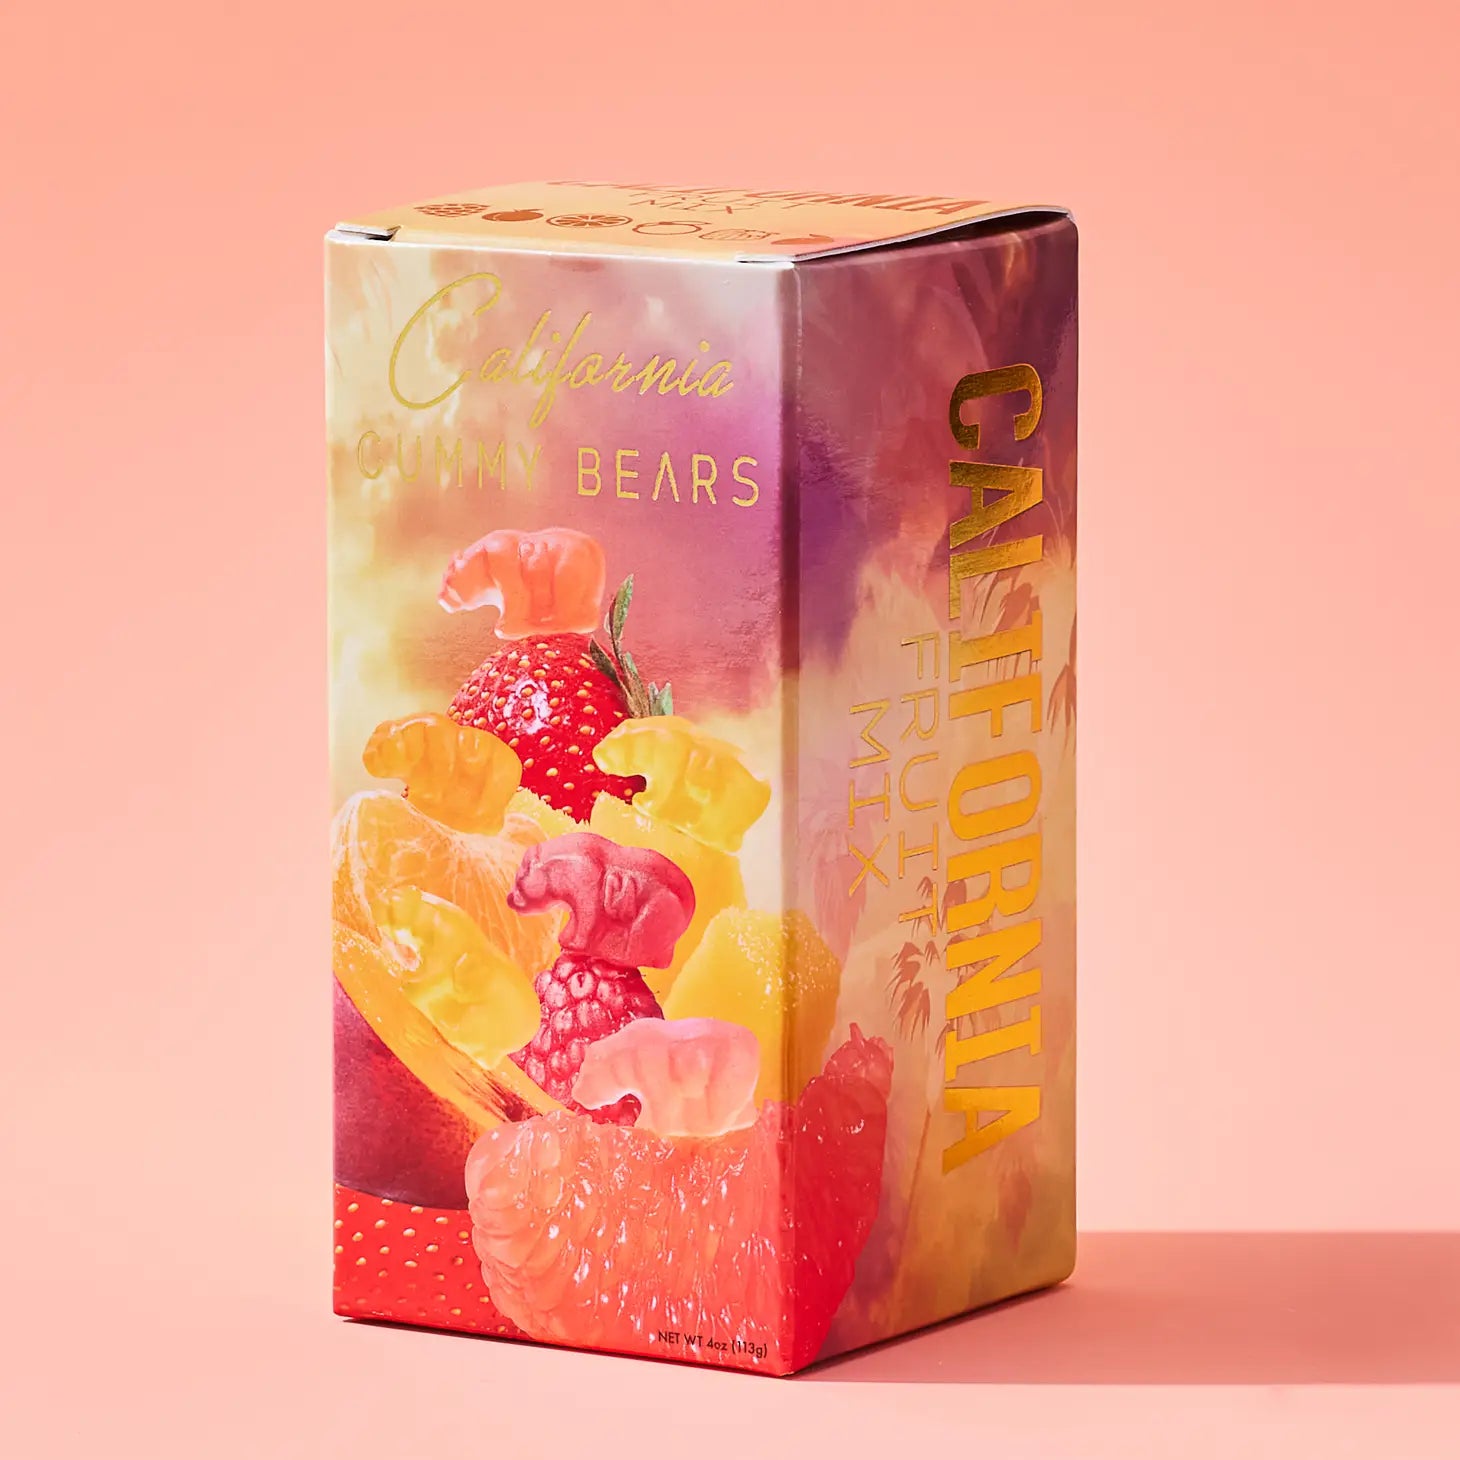 Colorful Box of California Gummy bears on pink background